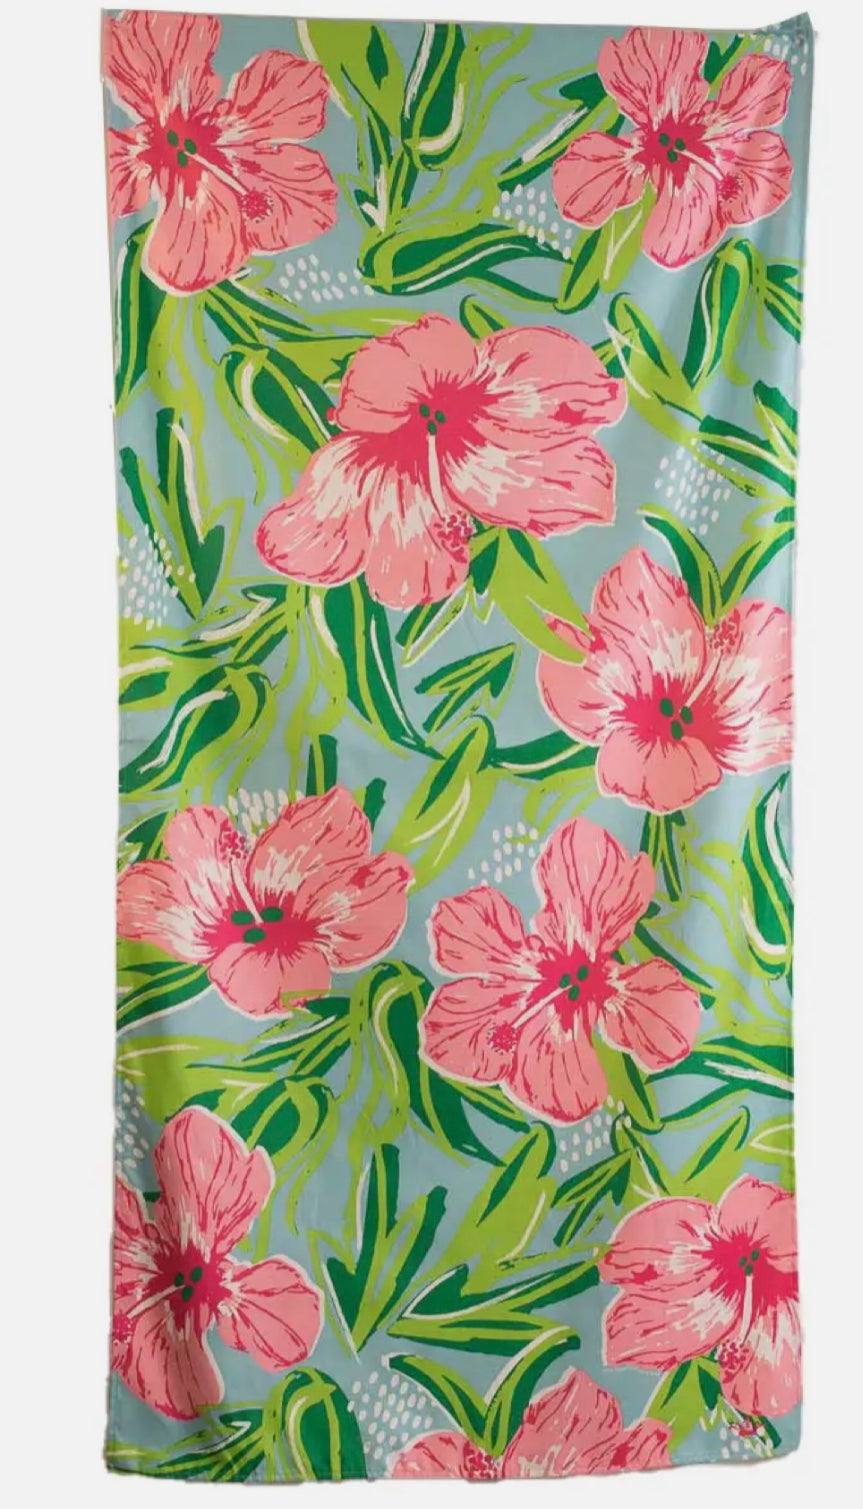 full view of pattern on beach towel - pink hibiscus green leaves on a blue background